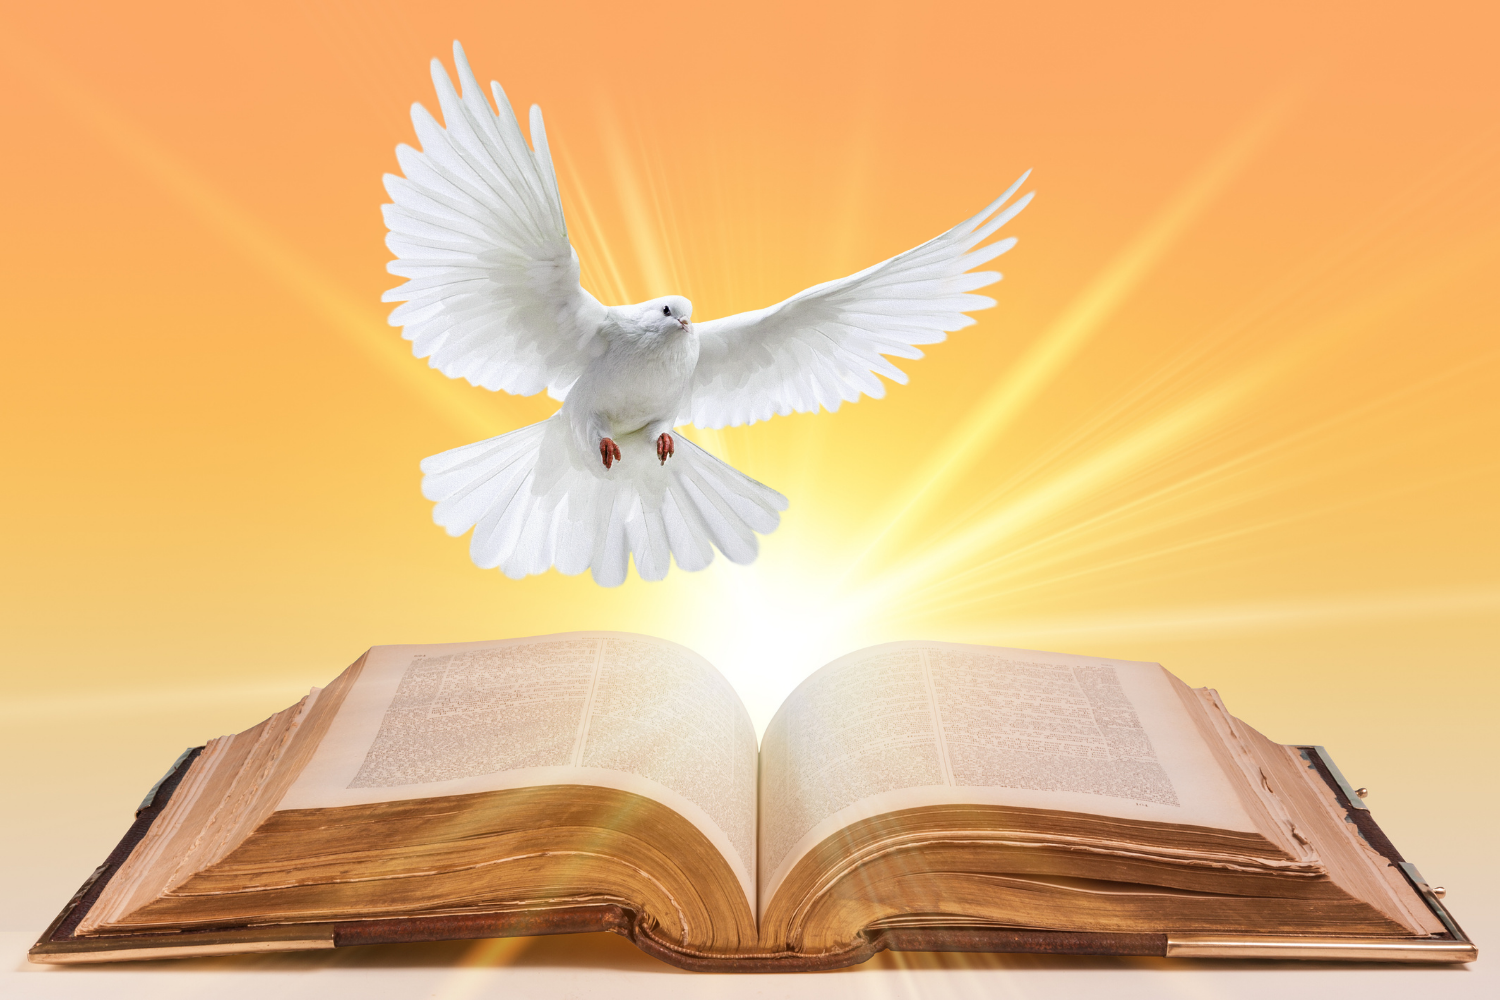 128-48c53c83 Pentecost: The coming of the Holy Spirit